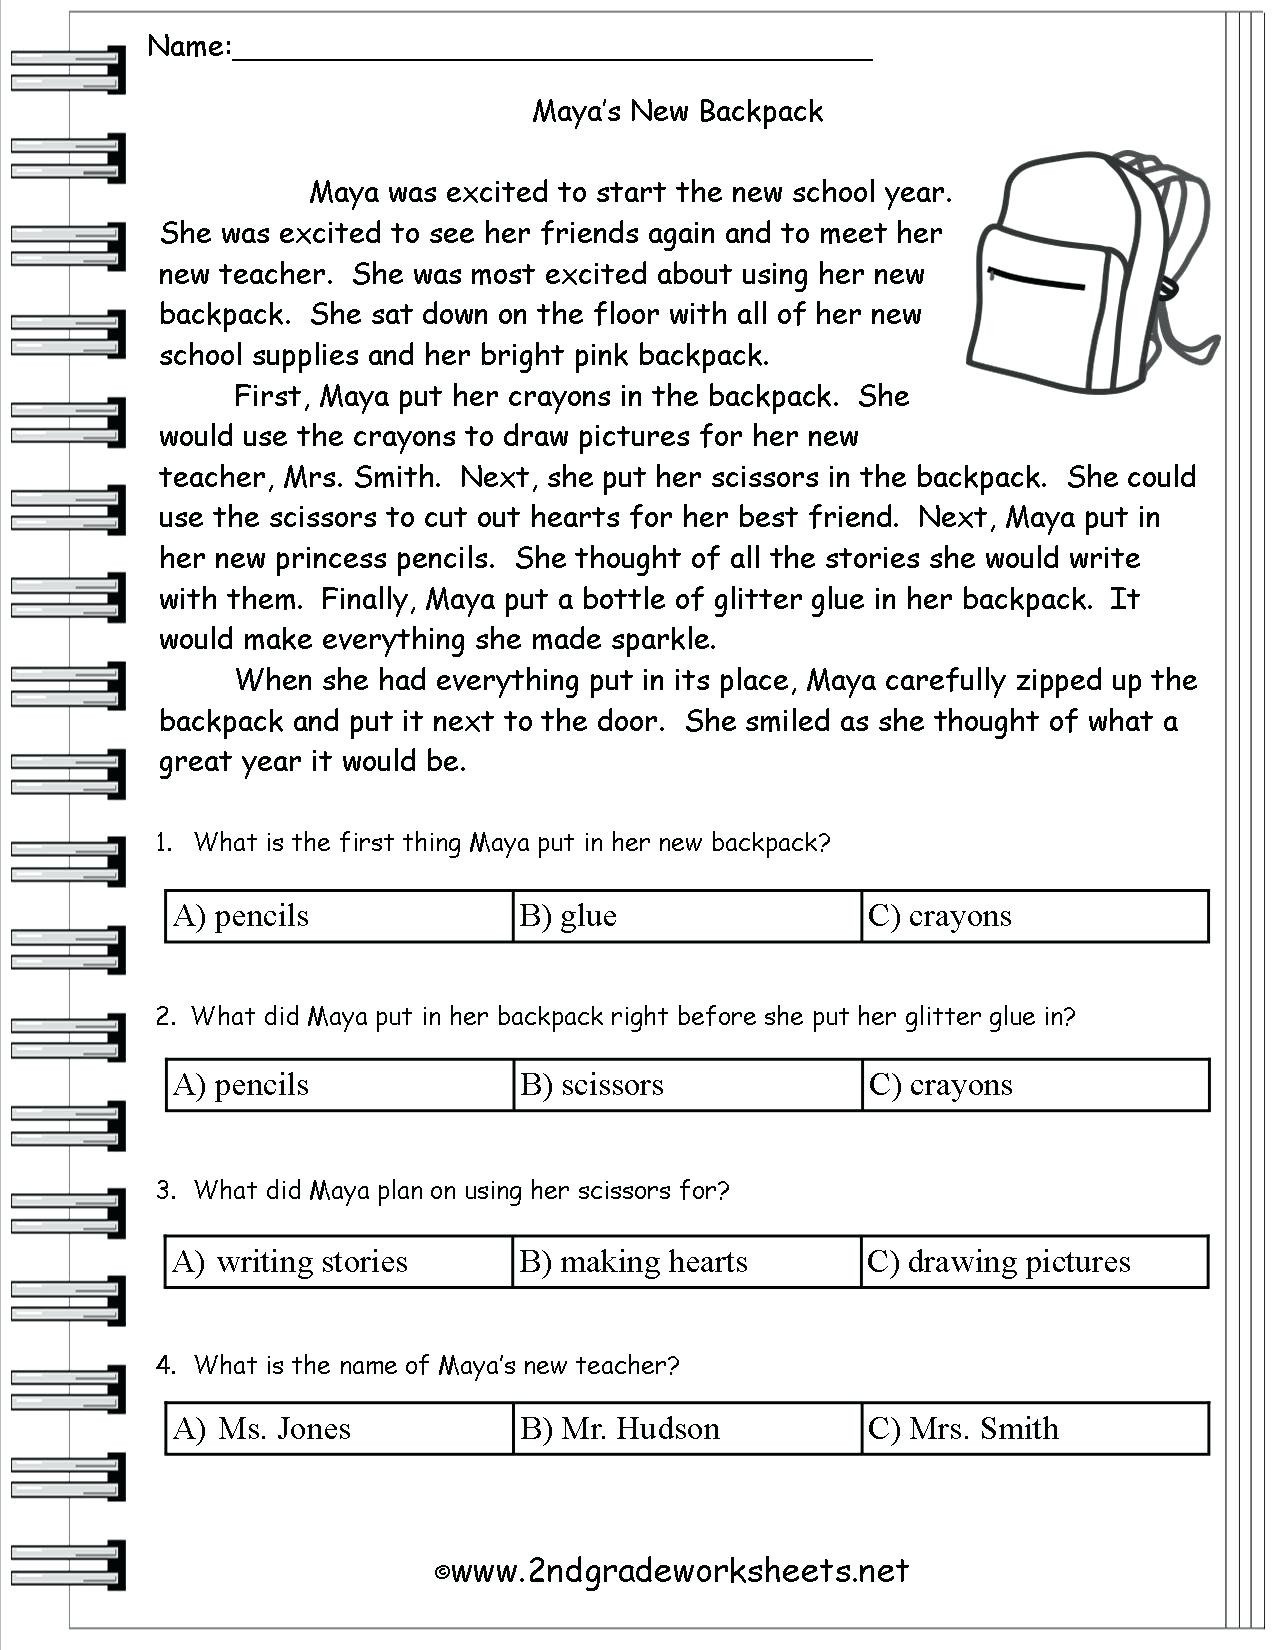 Theme Worksheets 5th Grade Finding theme Worksheets